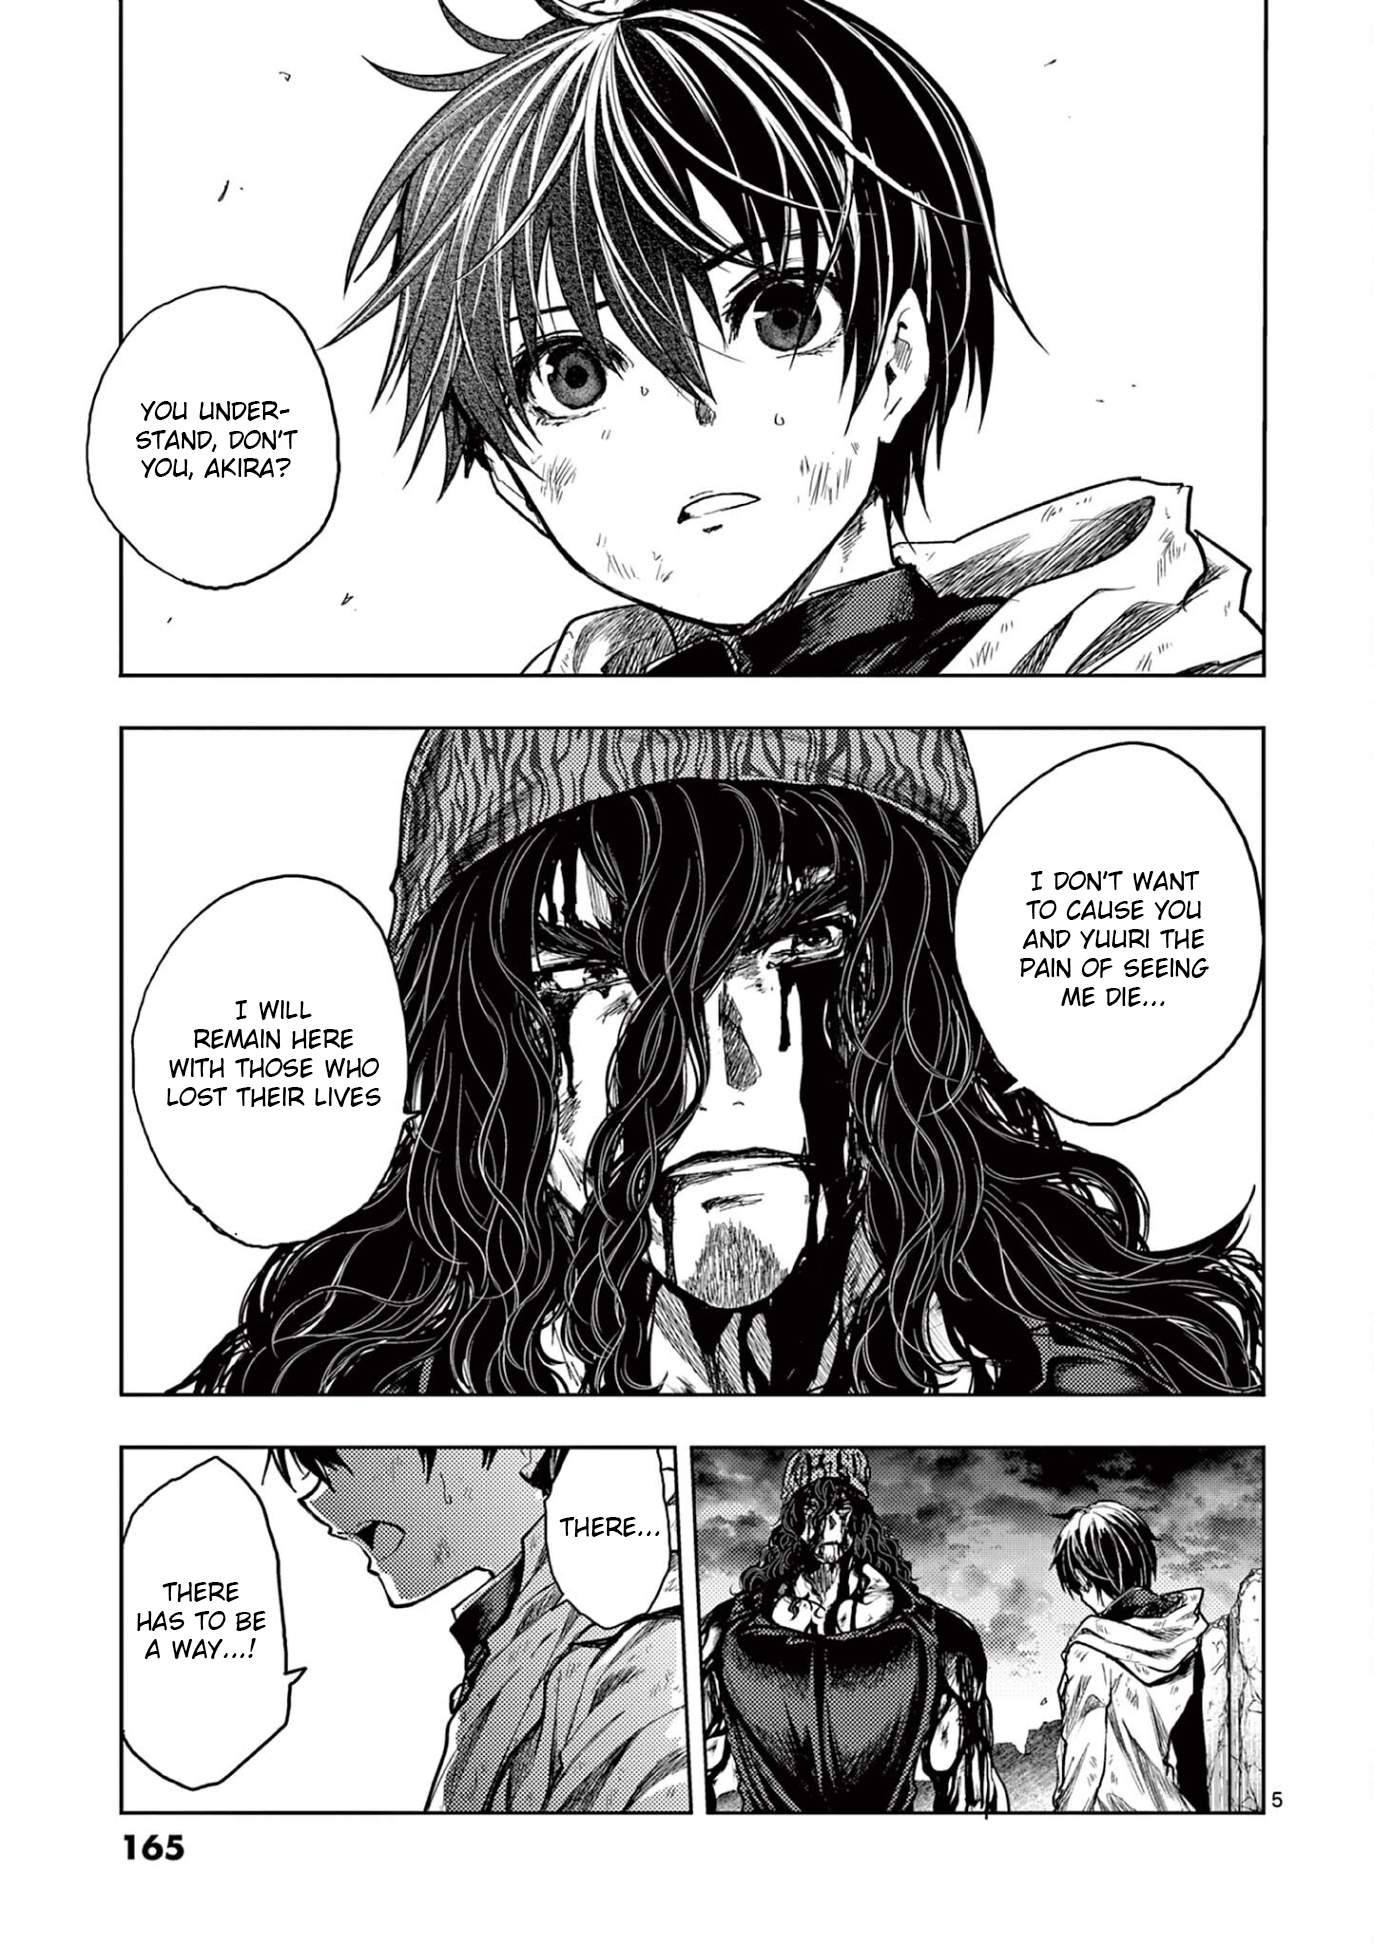 Start Fighting 5 Seconds After Meeting - chapter 151 - #5